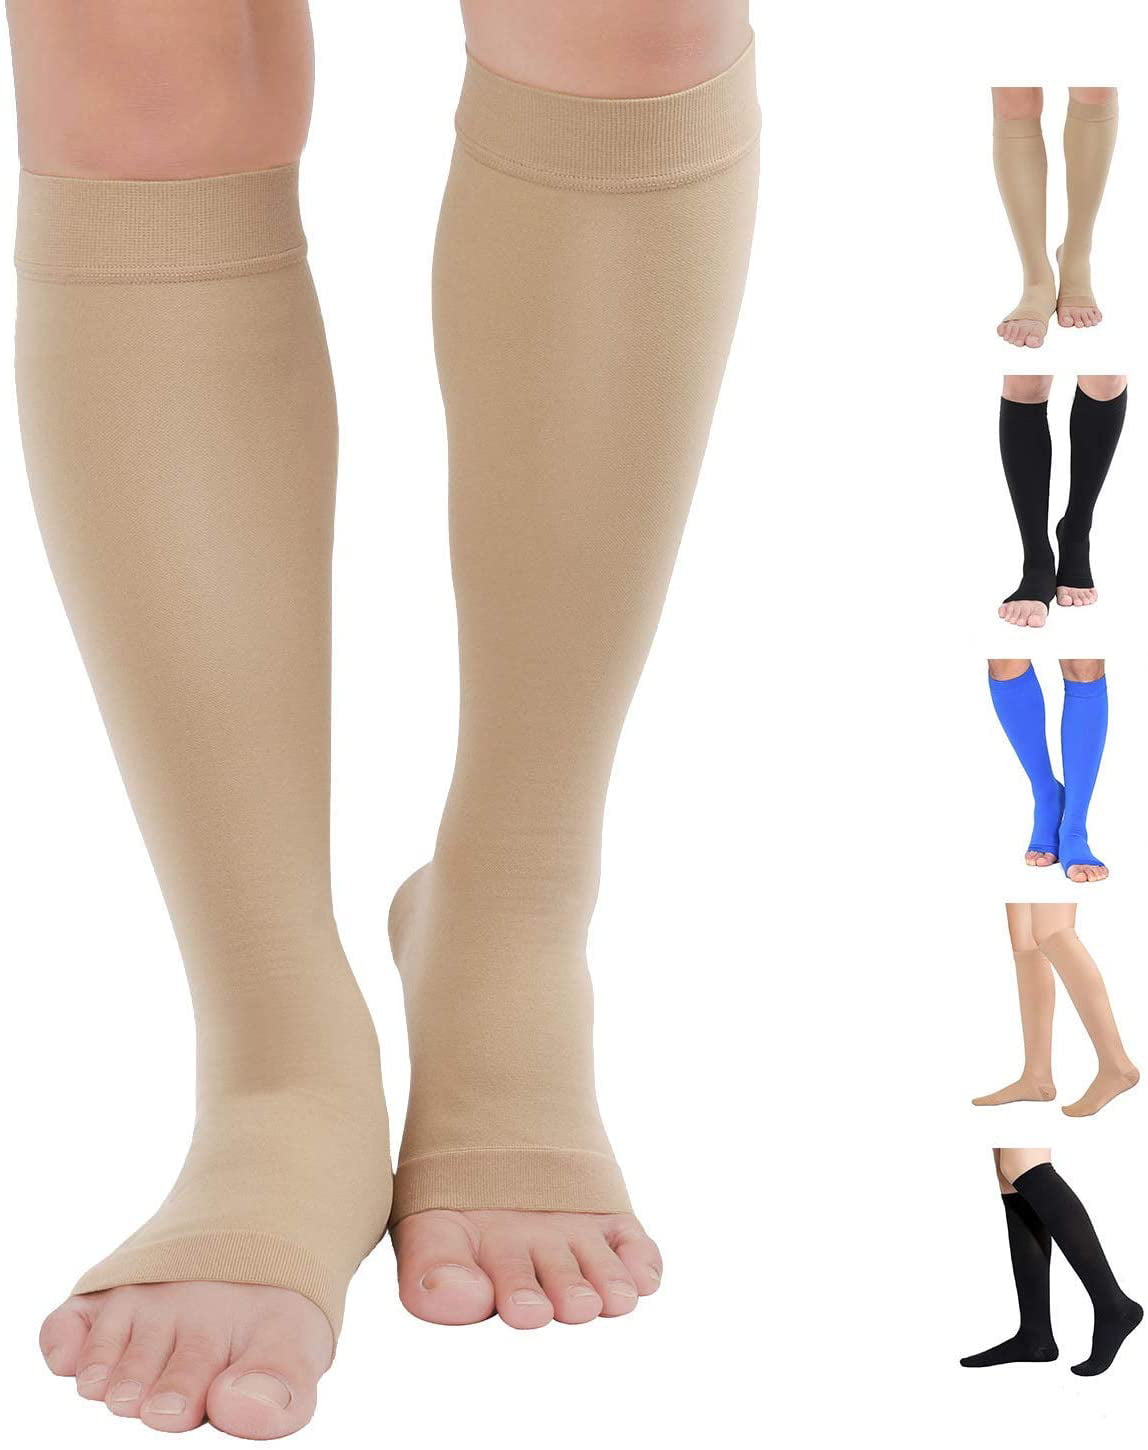 Women's Seamless Maternity Socks Gentle Grip for Swelling Injured Wounded Feet M 